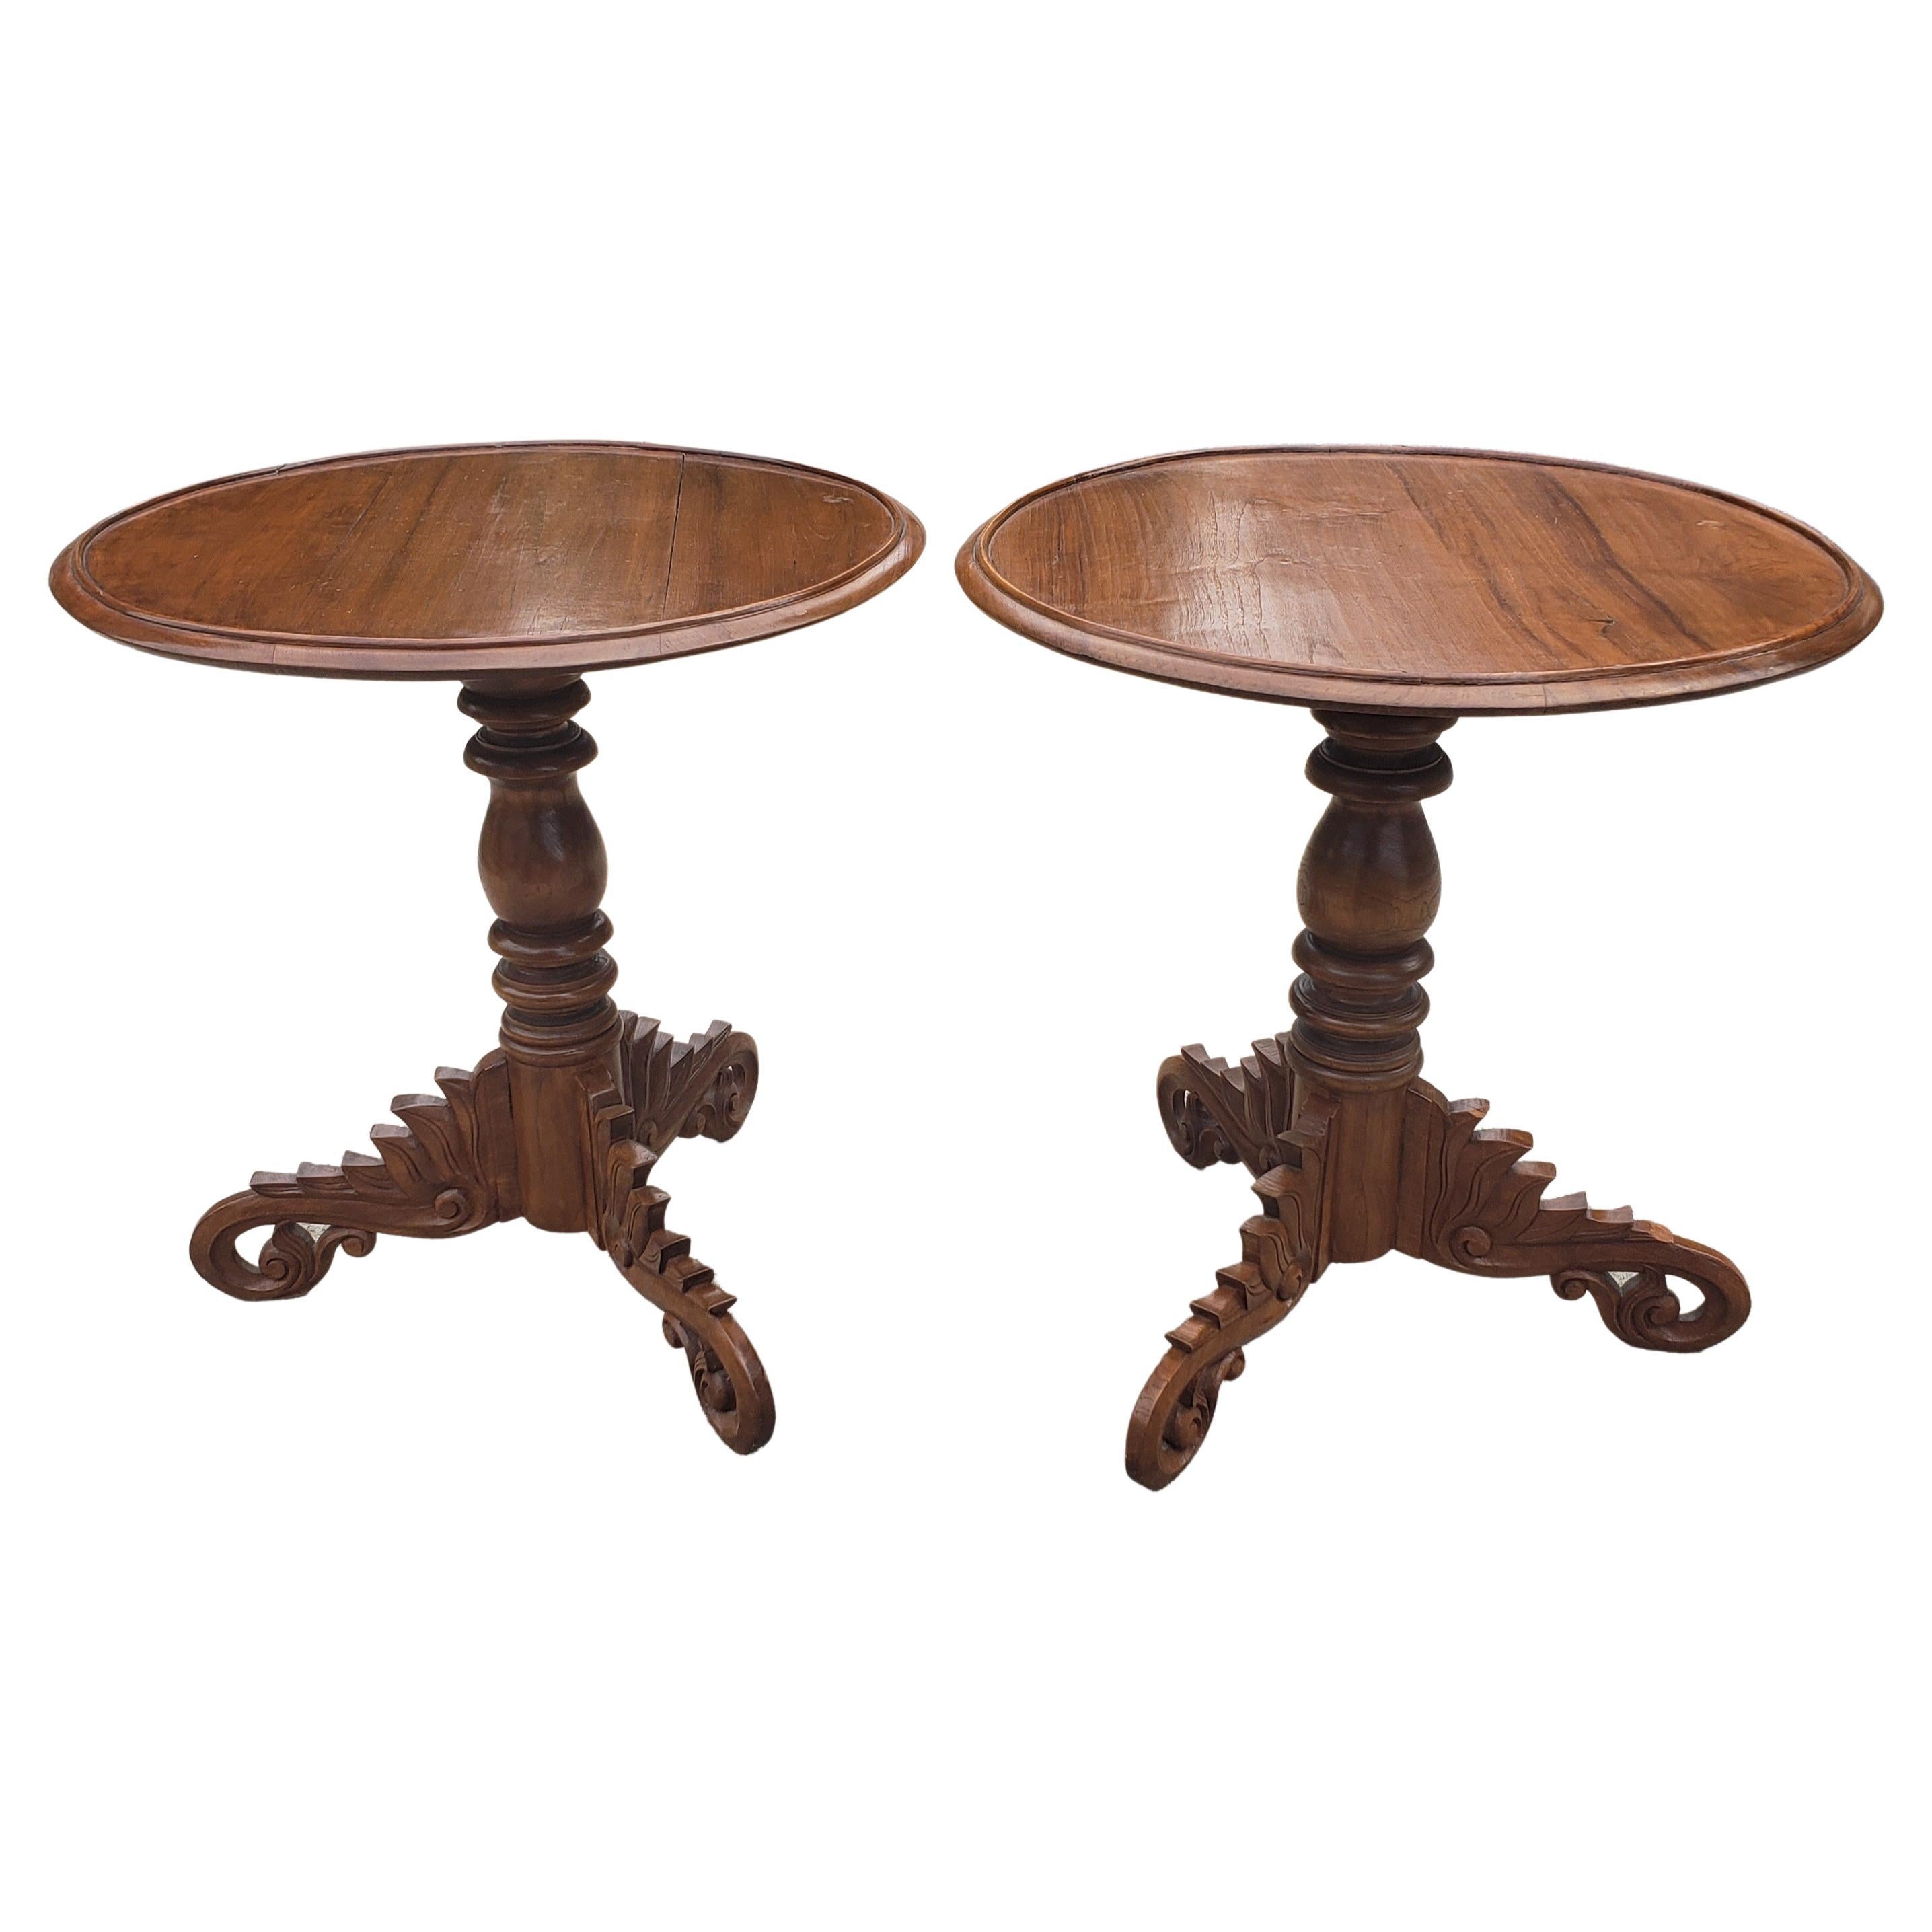 Vintage Pedestal Mahogany Tripod Gator Tail Feet Side Tables, a Pair For Sale 1